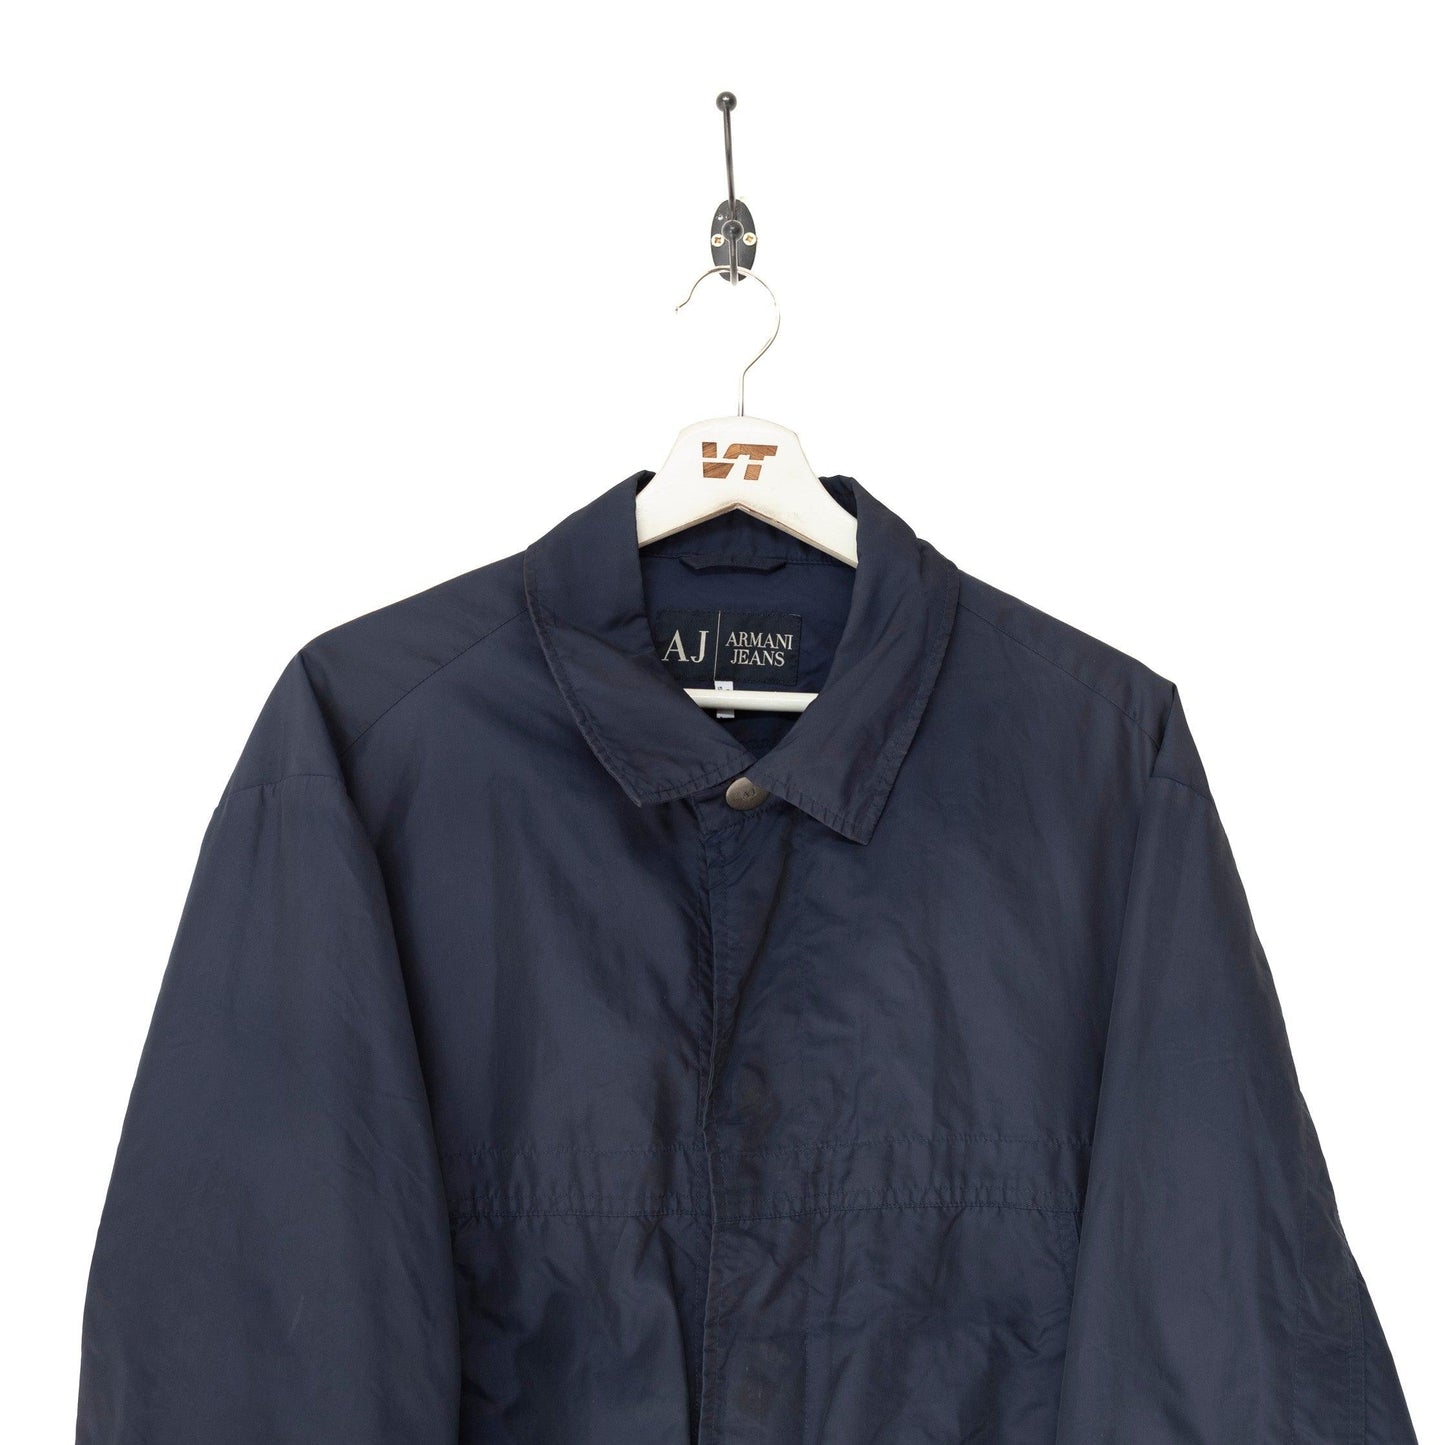 Armani Jeans Navy Technical Jacket - Known Source